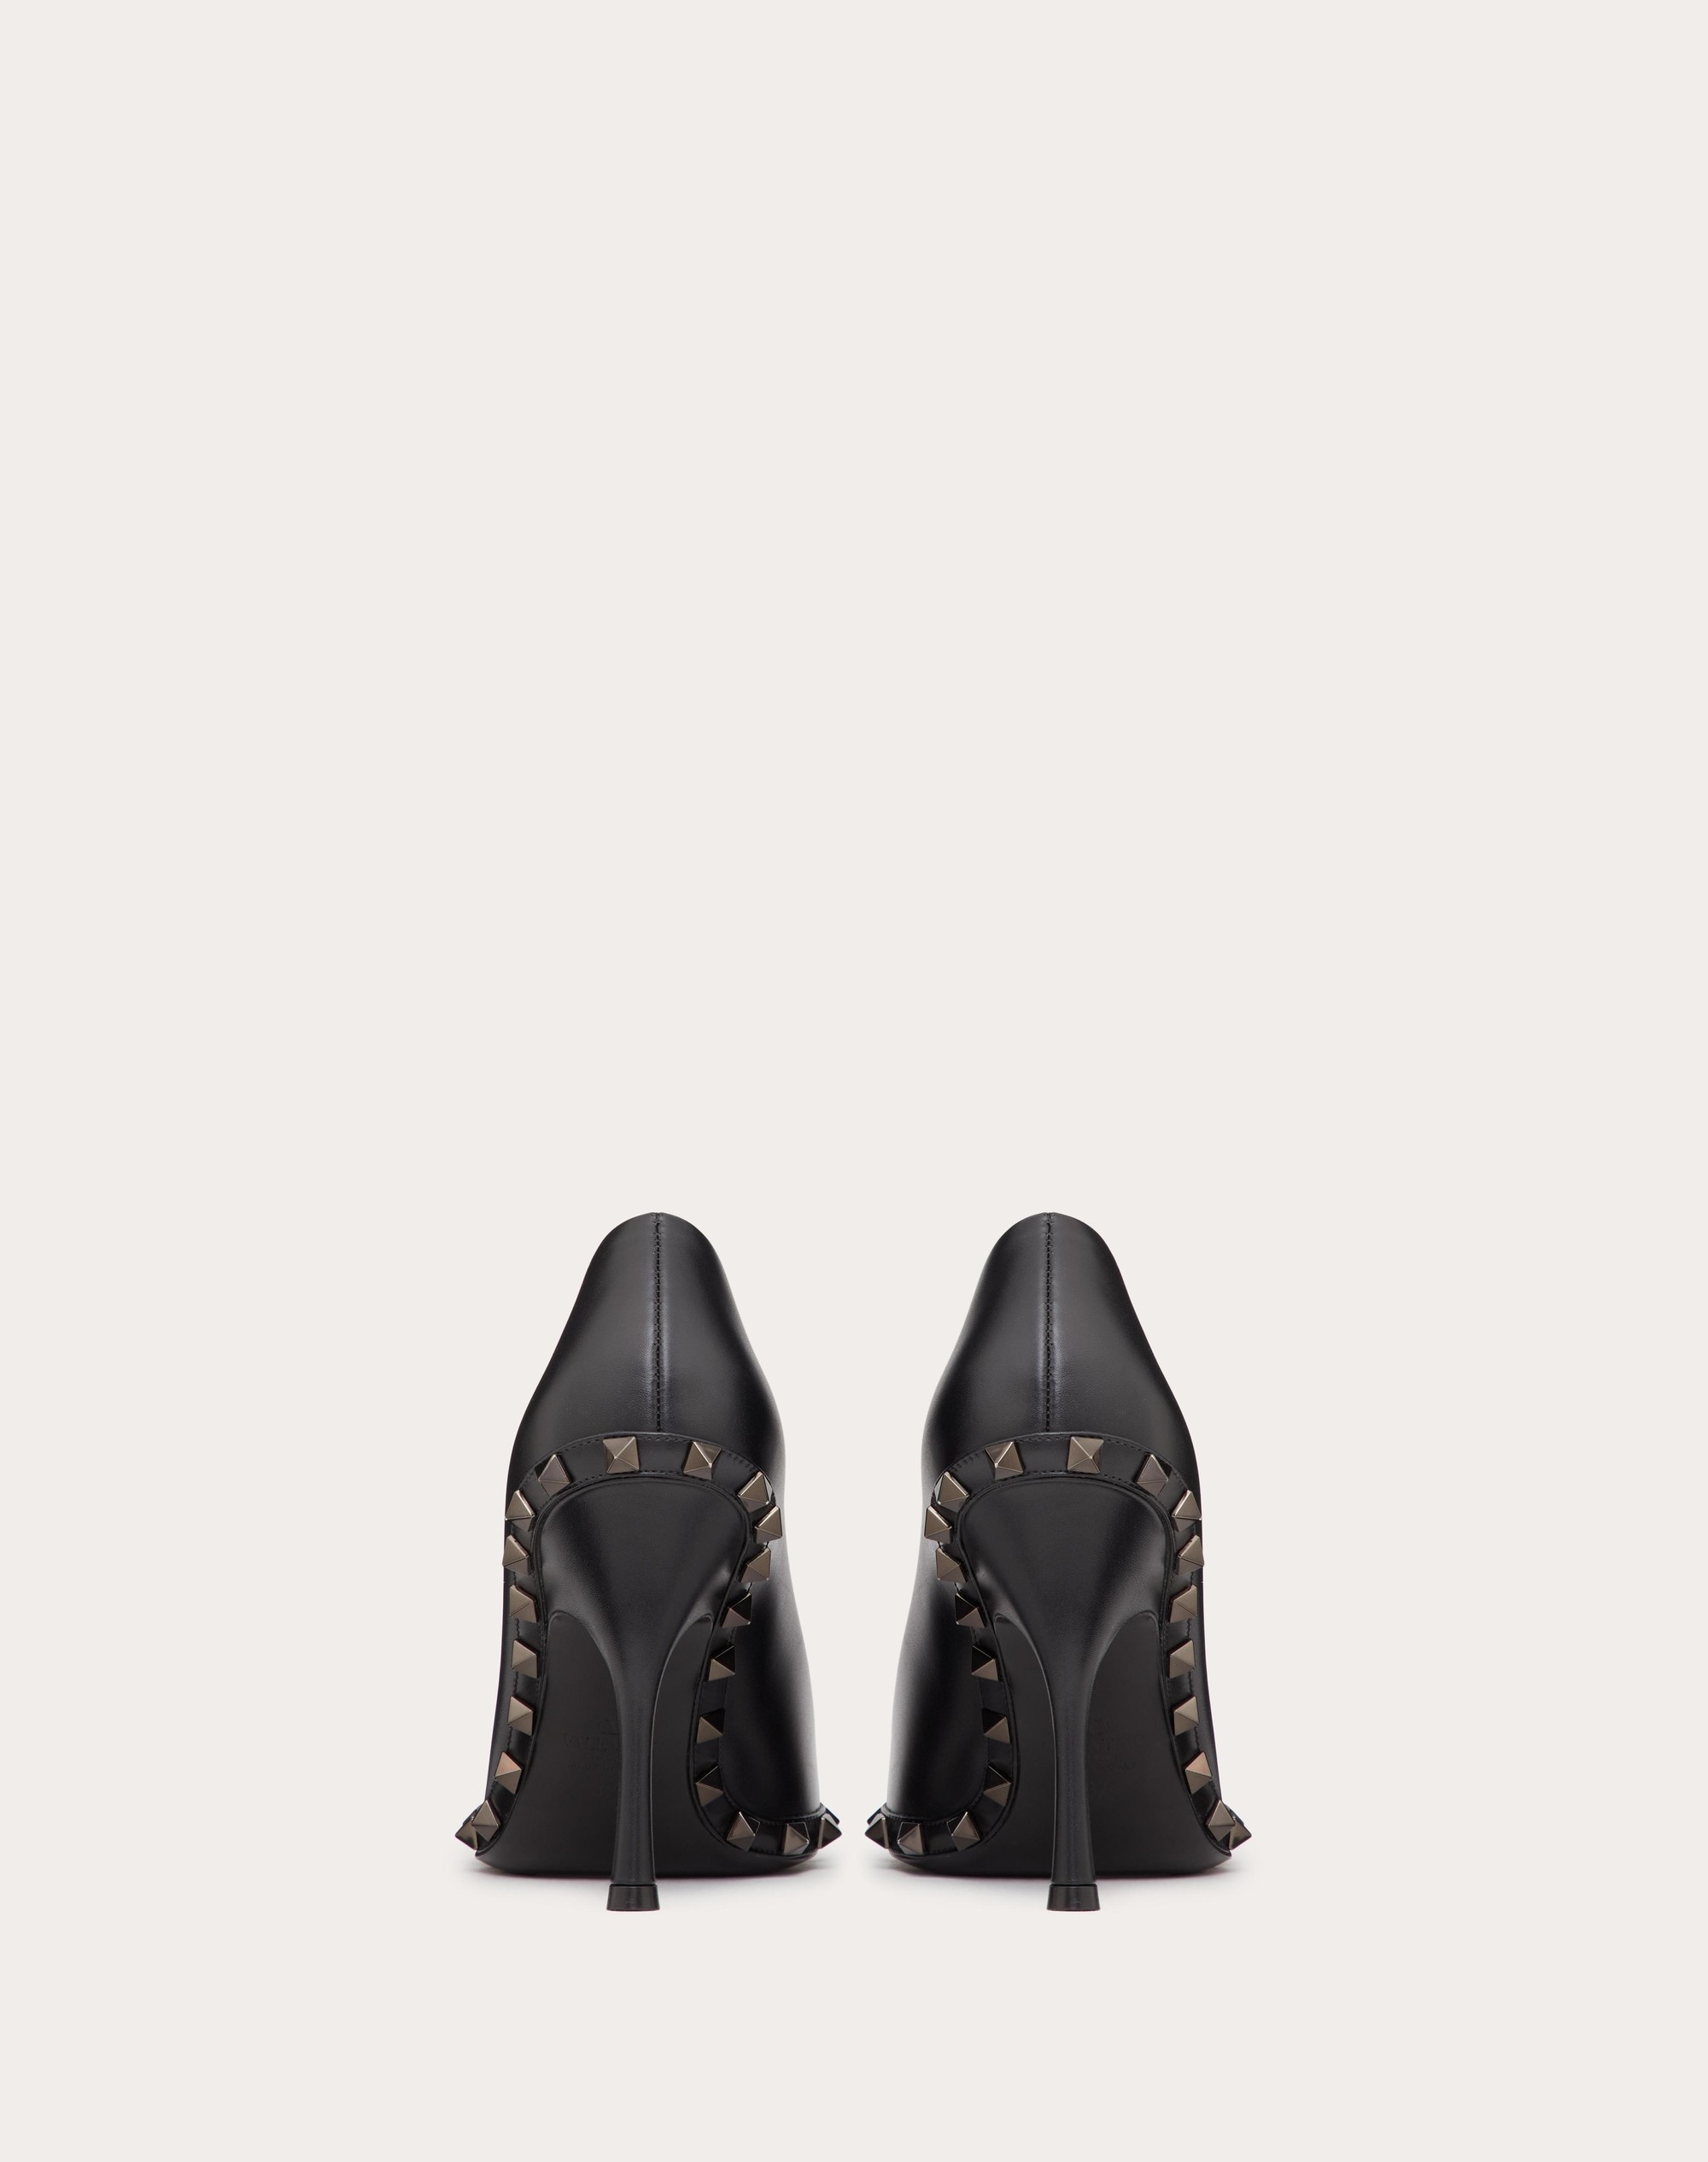 ROCKSTUD PUMPS IN CALFSKIN WITH TONE-ON-TONE STUDS 100MM - 3